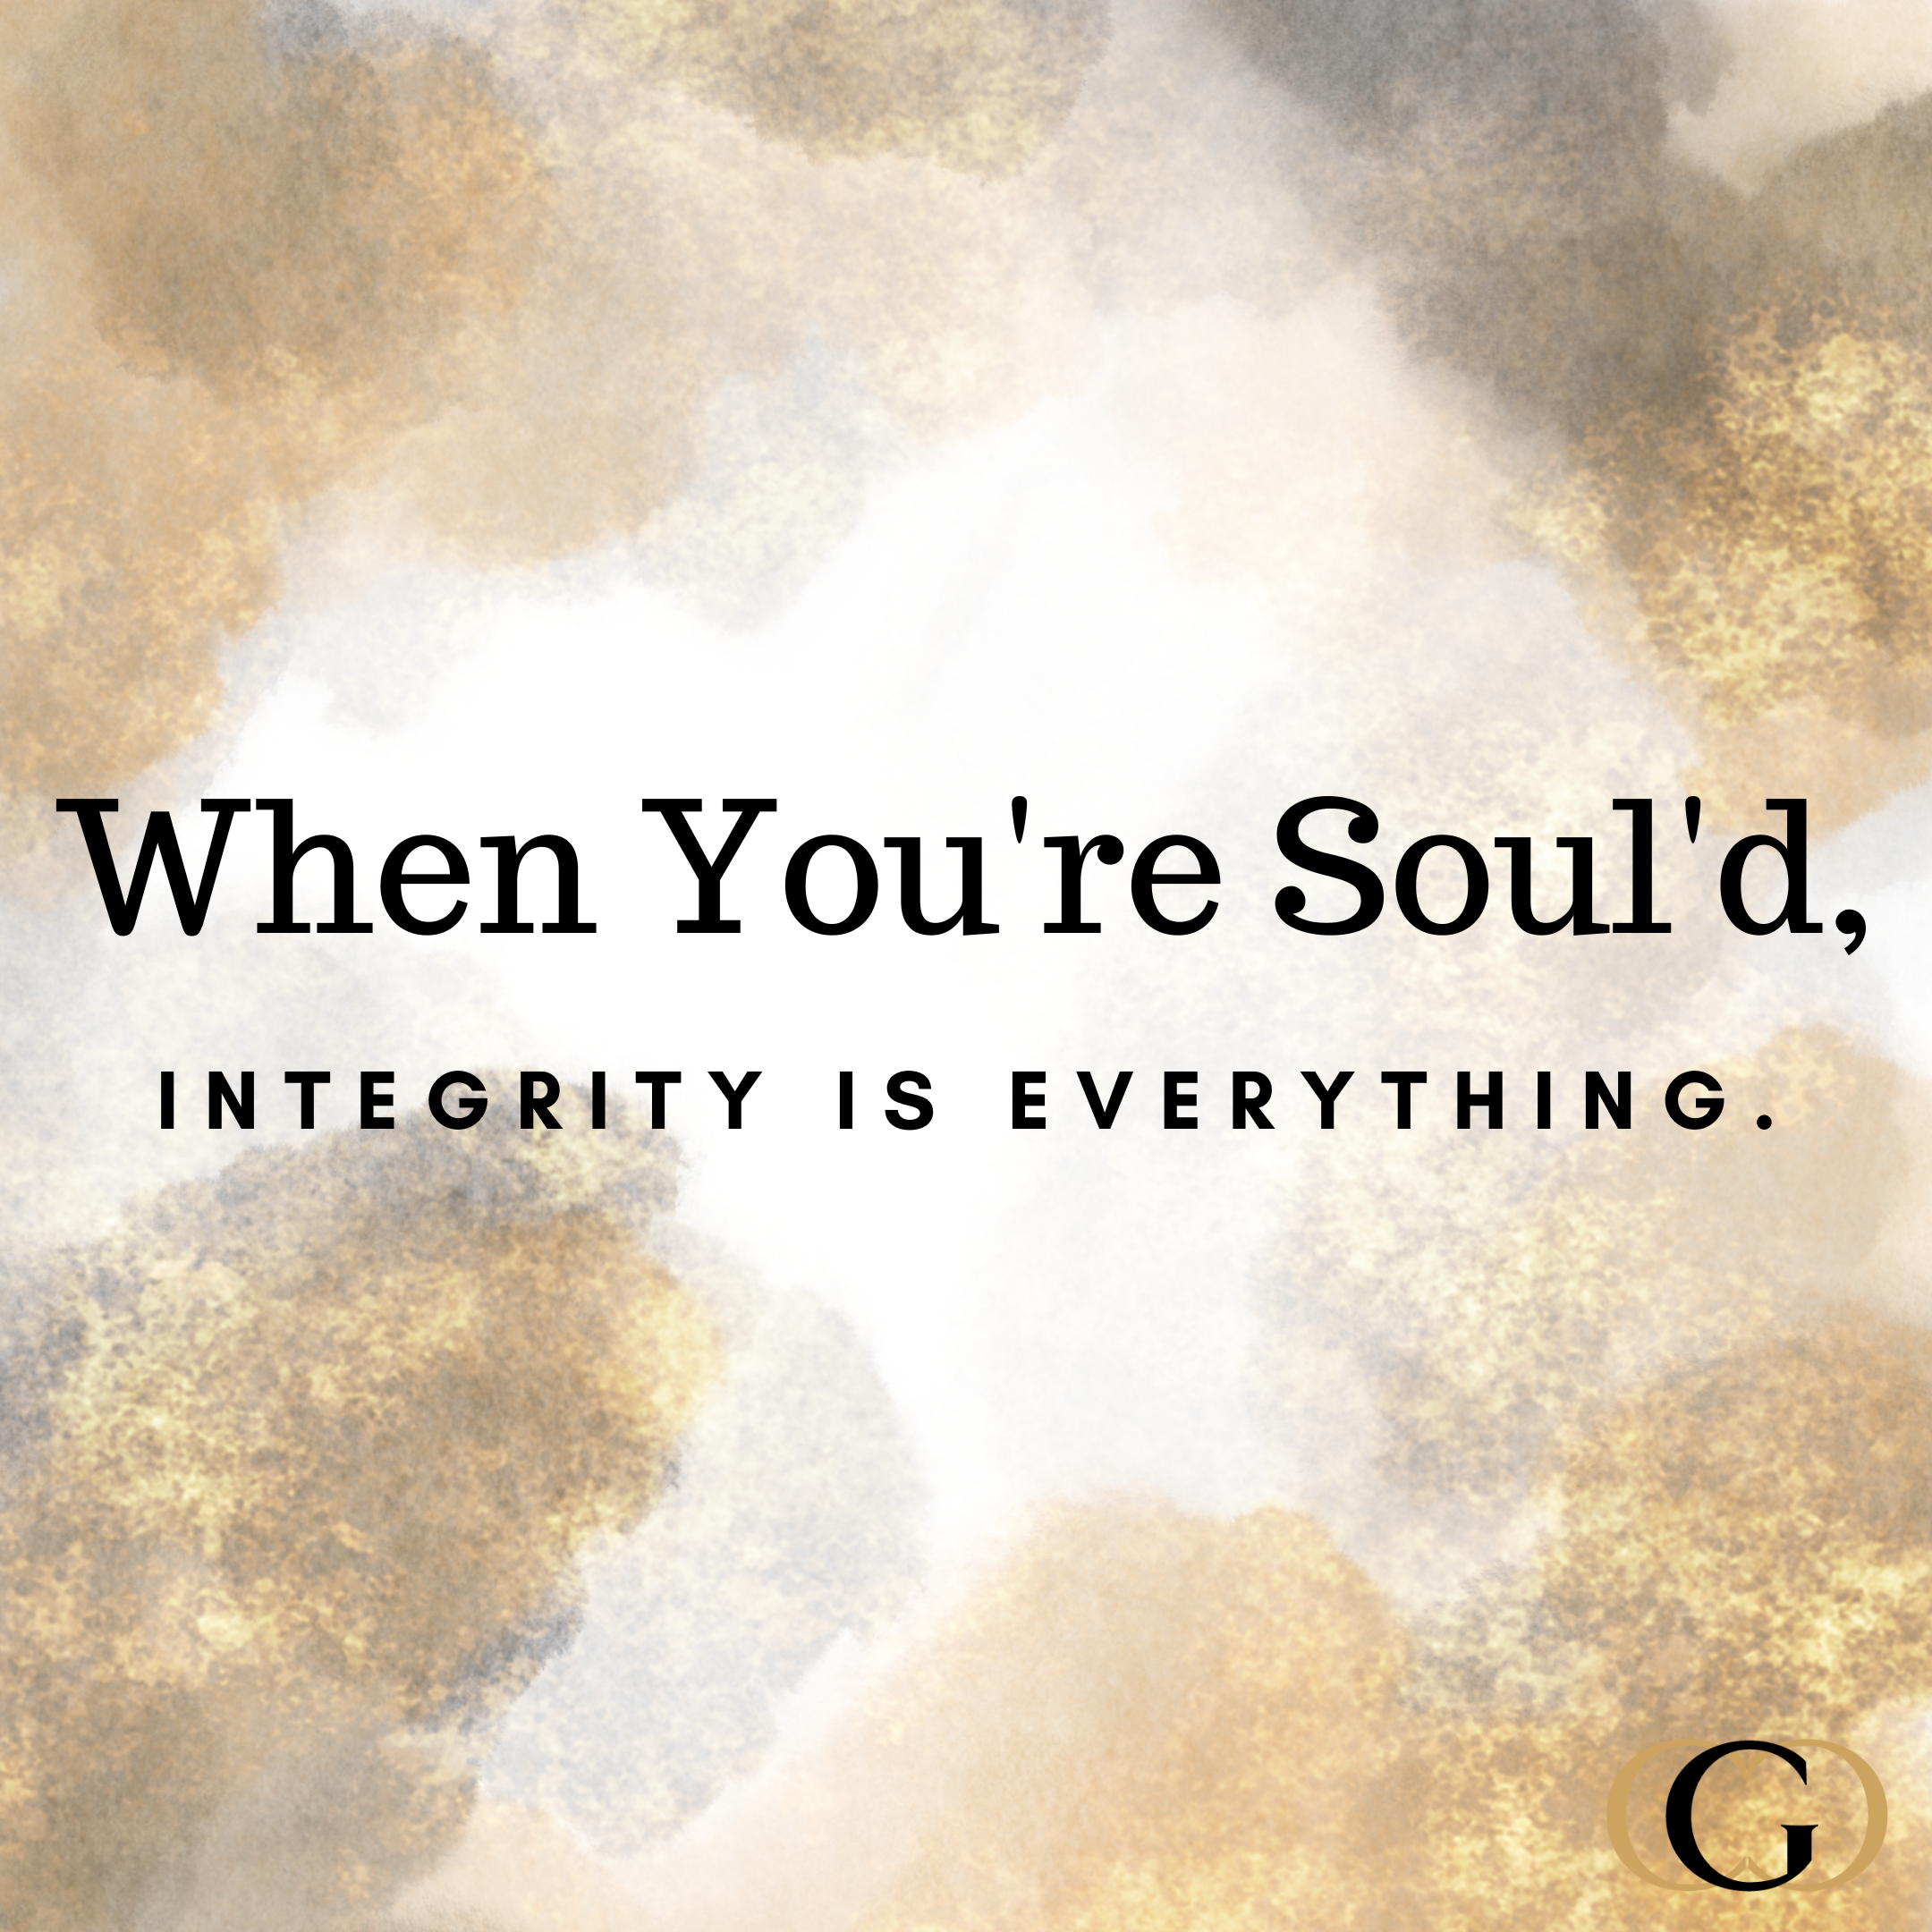 When You're Soul'd, Integrity is Everything